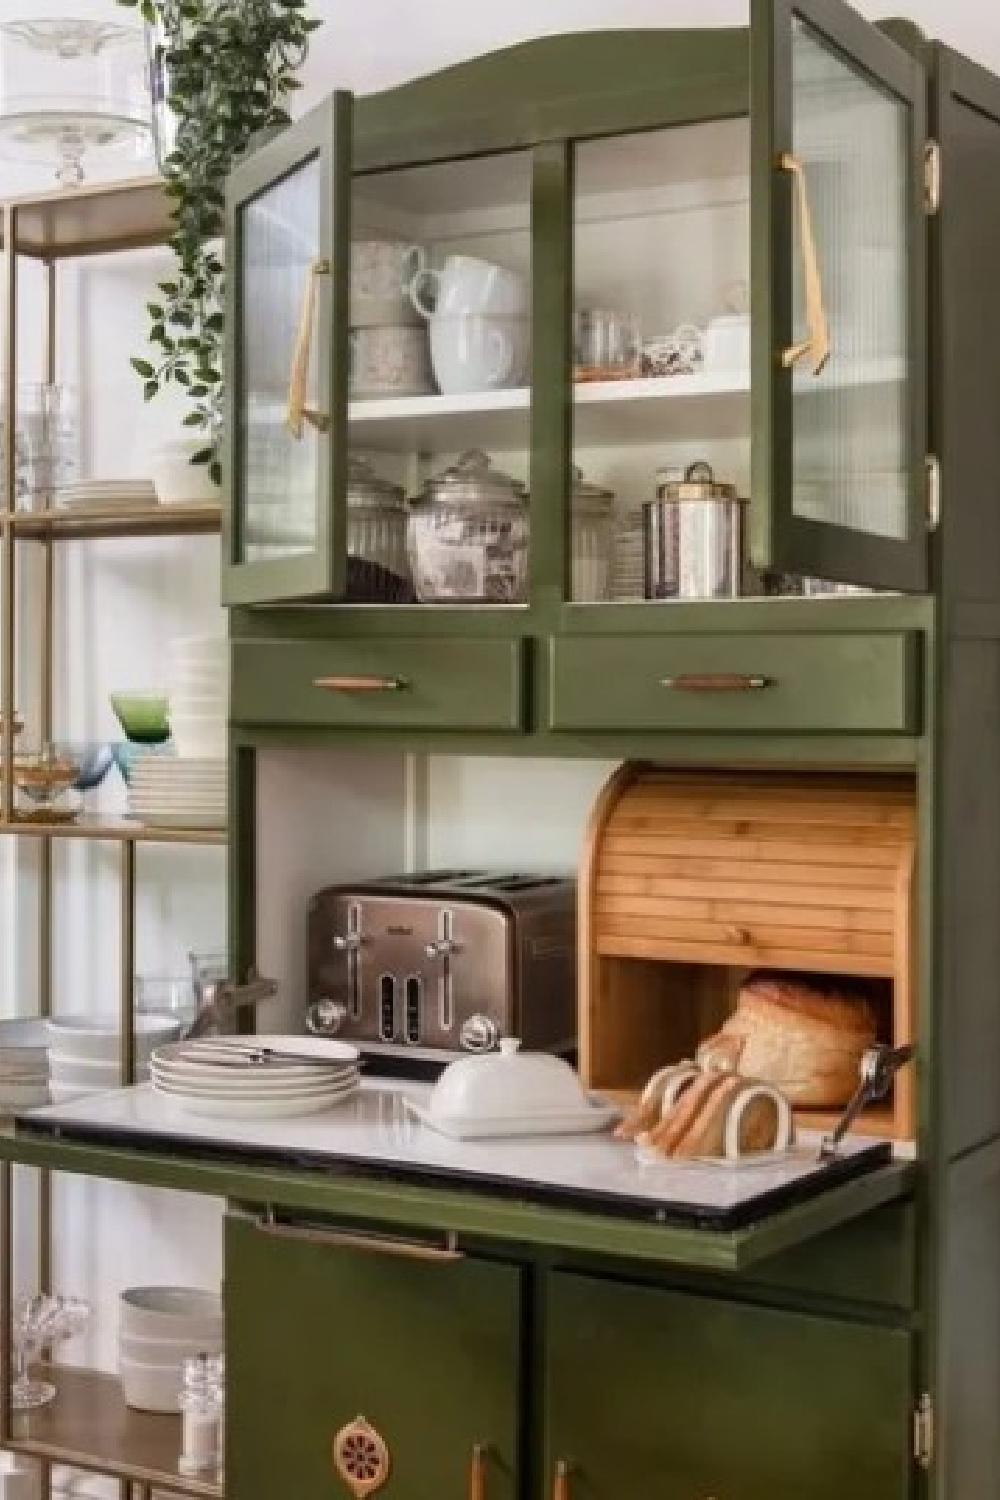 Bancha (Farrow & Ball) paint color on a kitchen cupboard with toaster - @victoriaaldersonart. #bancha #greenpaintcolors